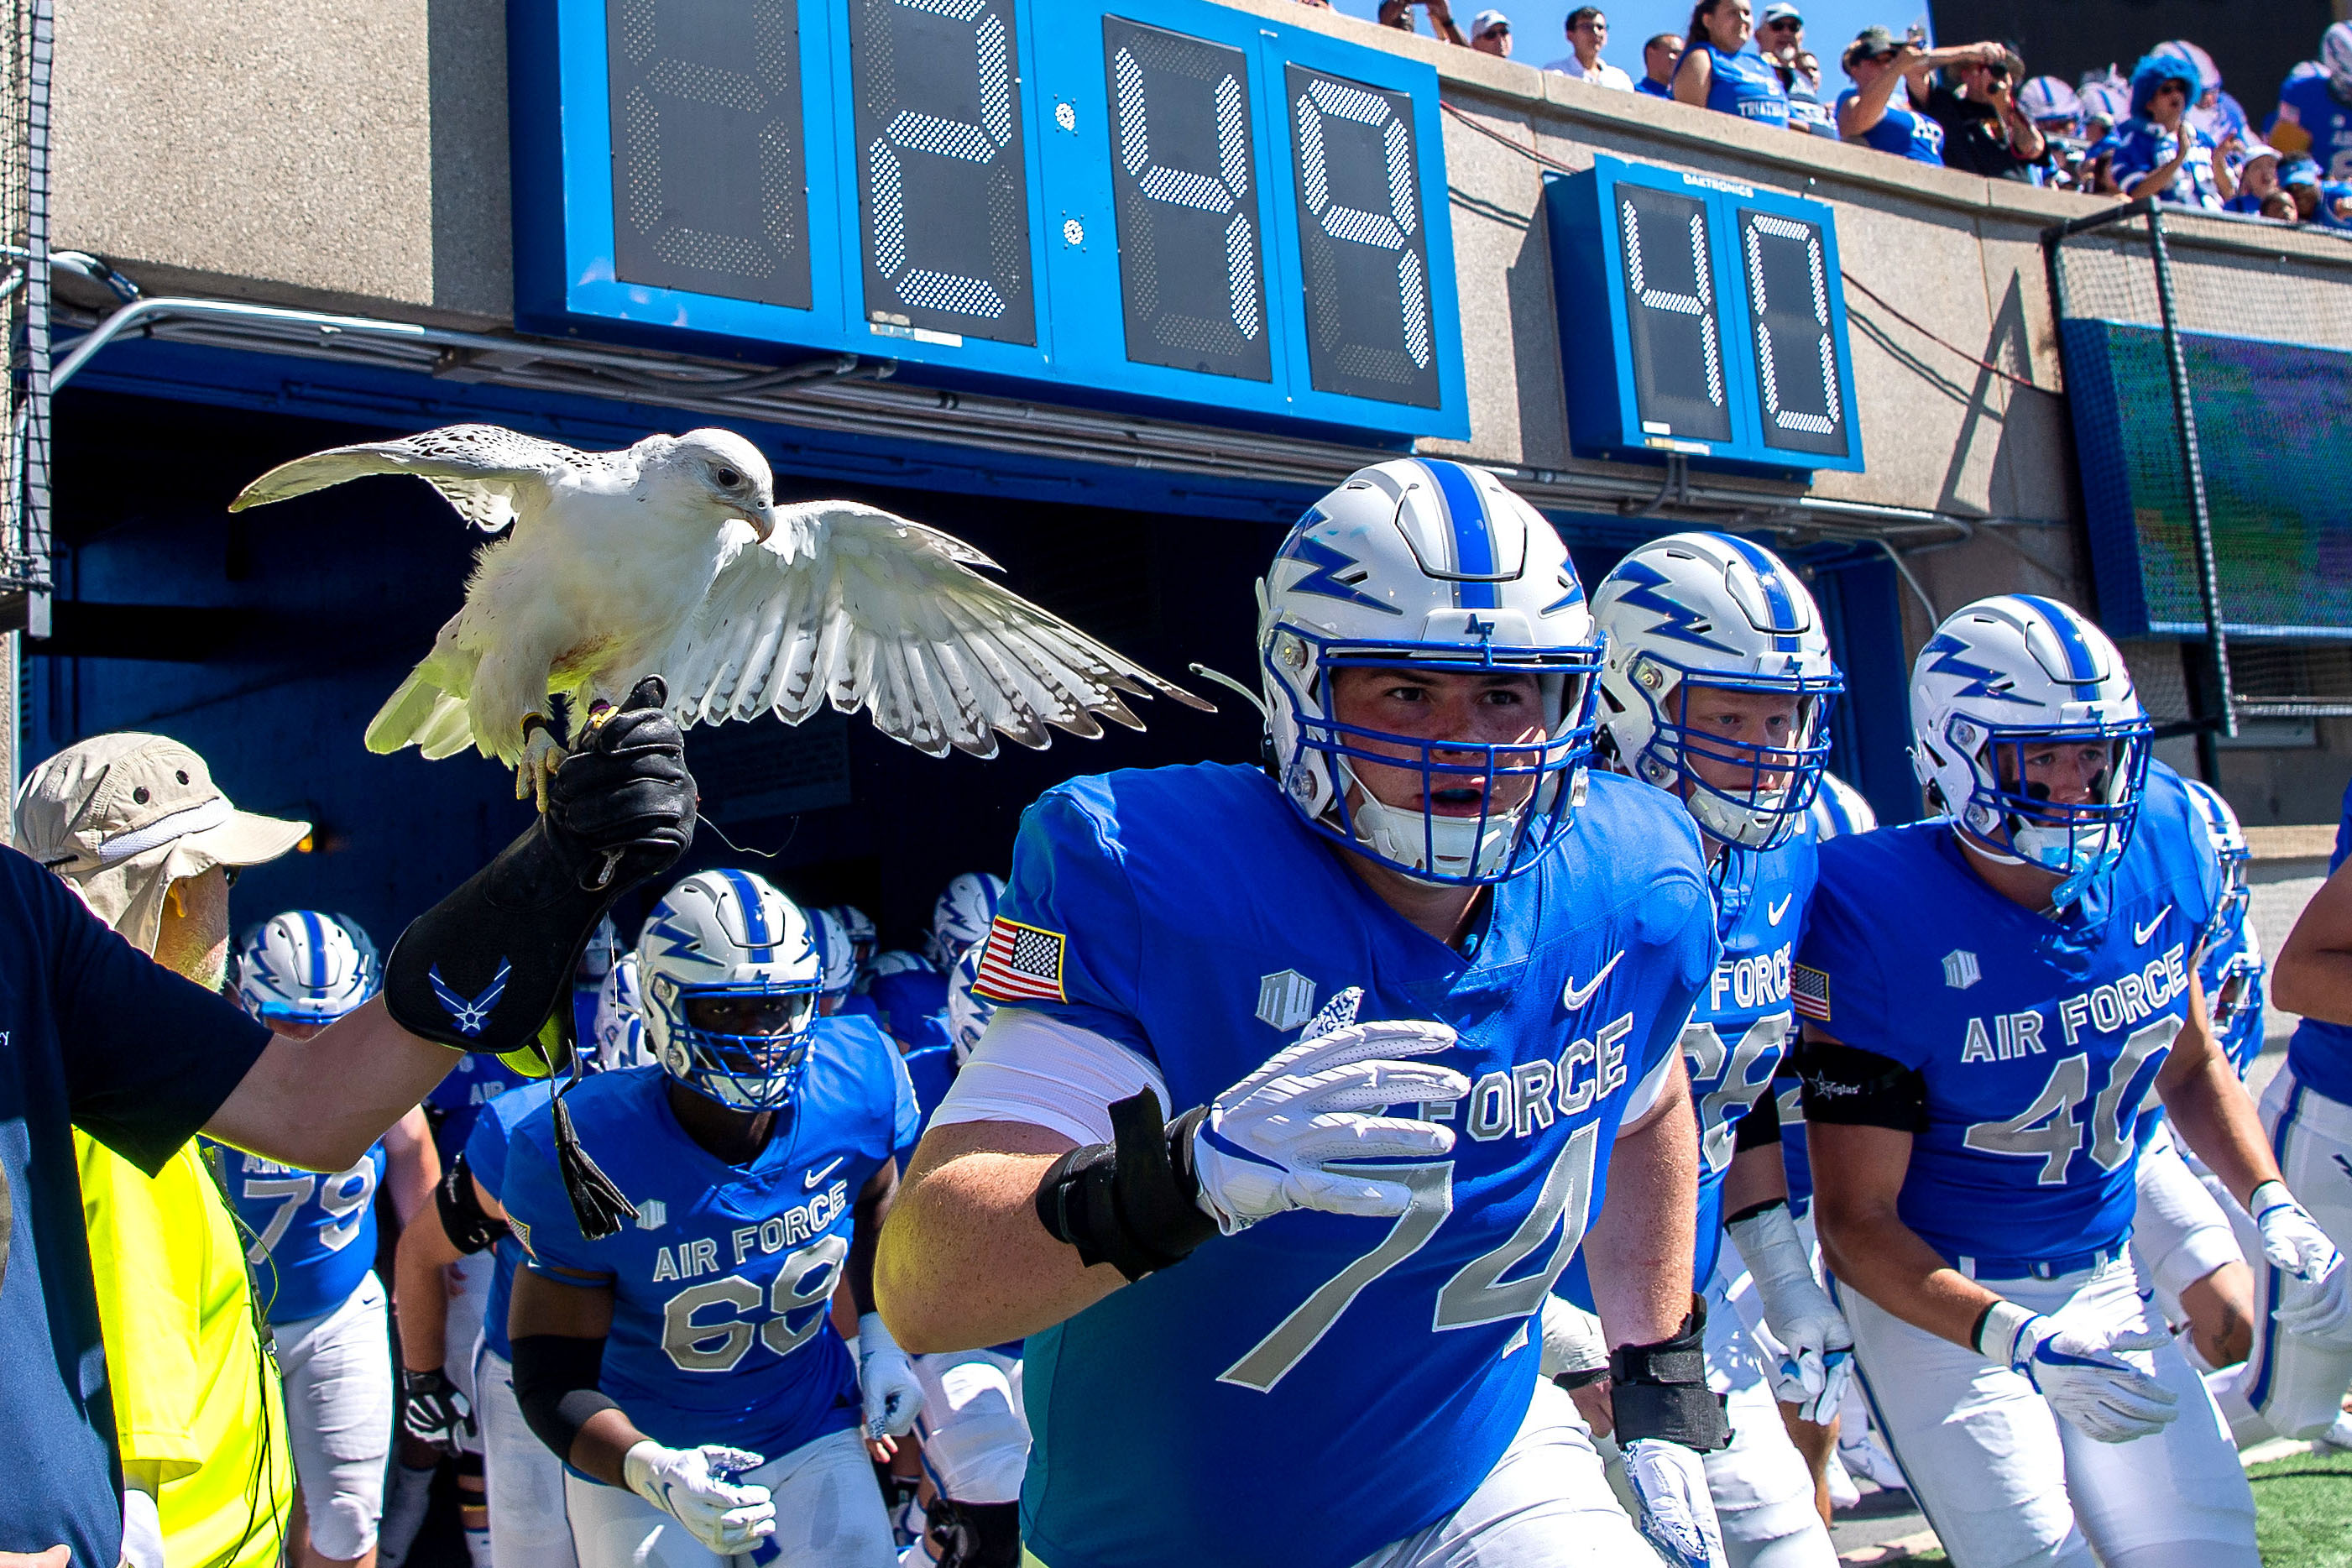 Guide to Falcon football season 2022 • United States Air Force Academy